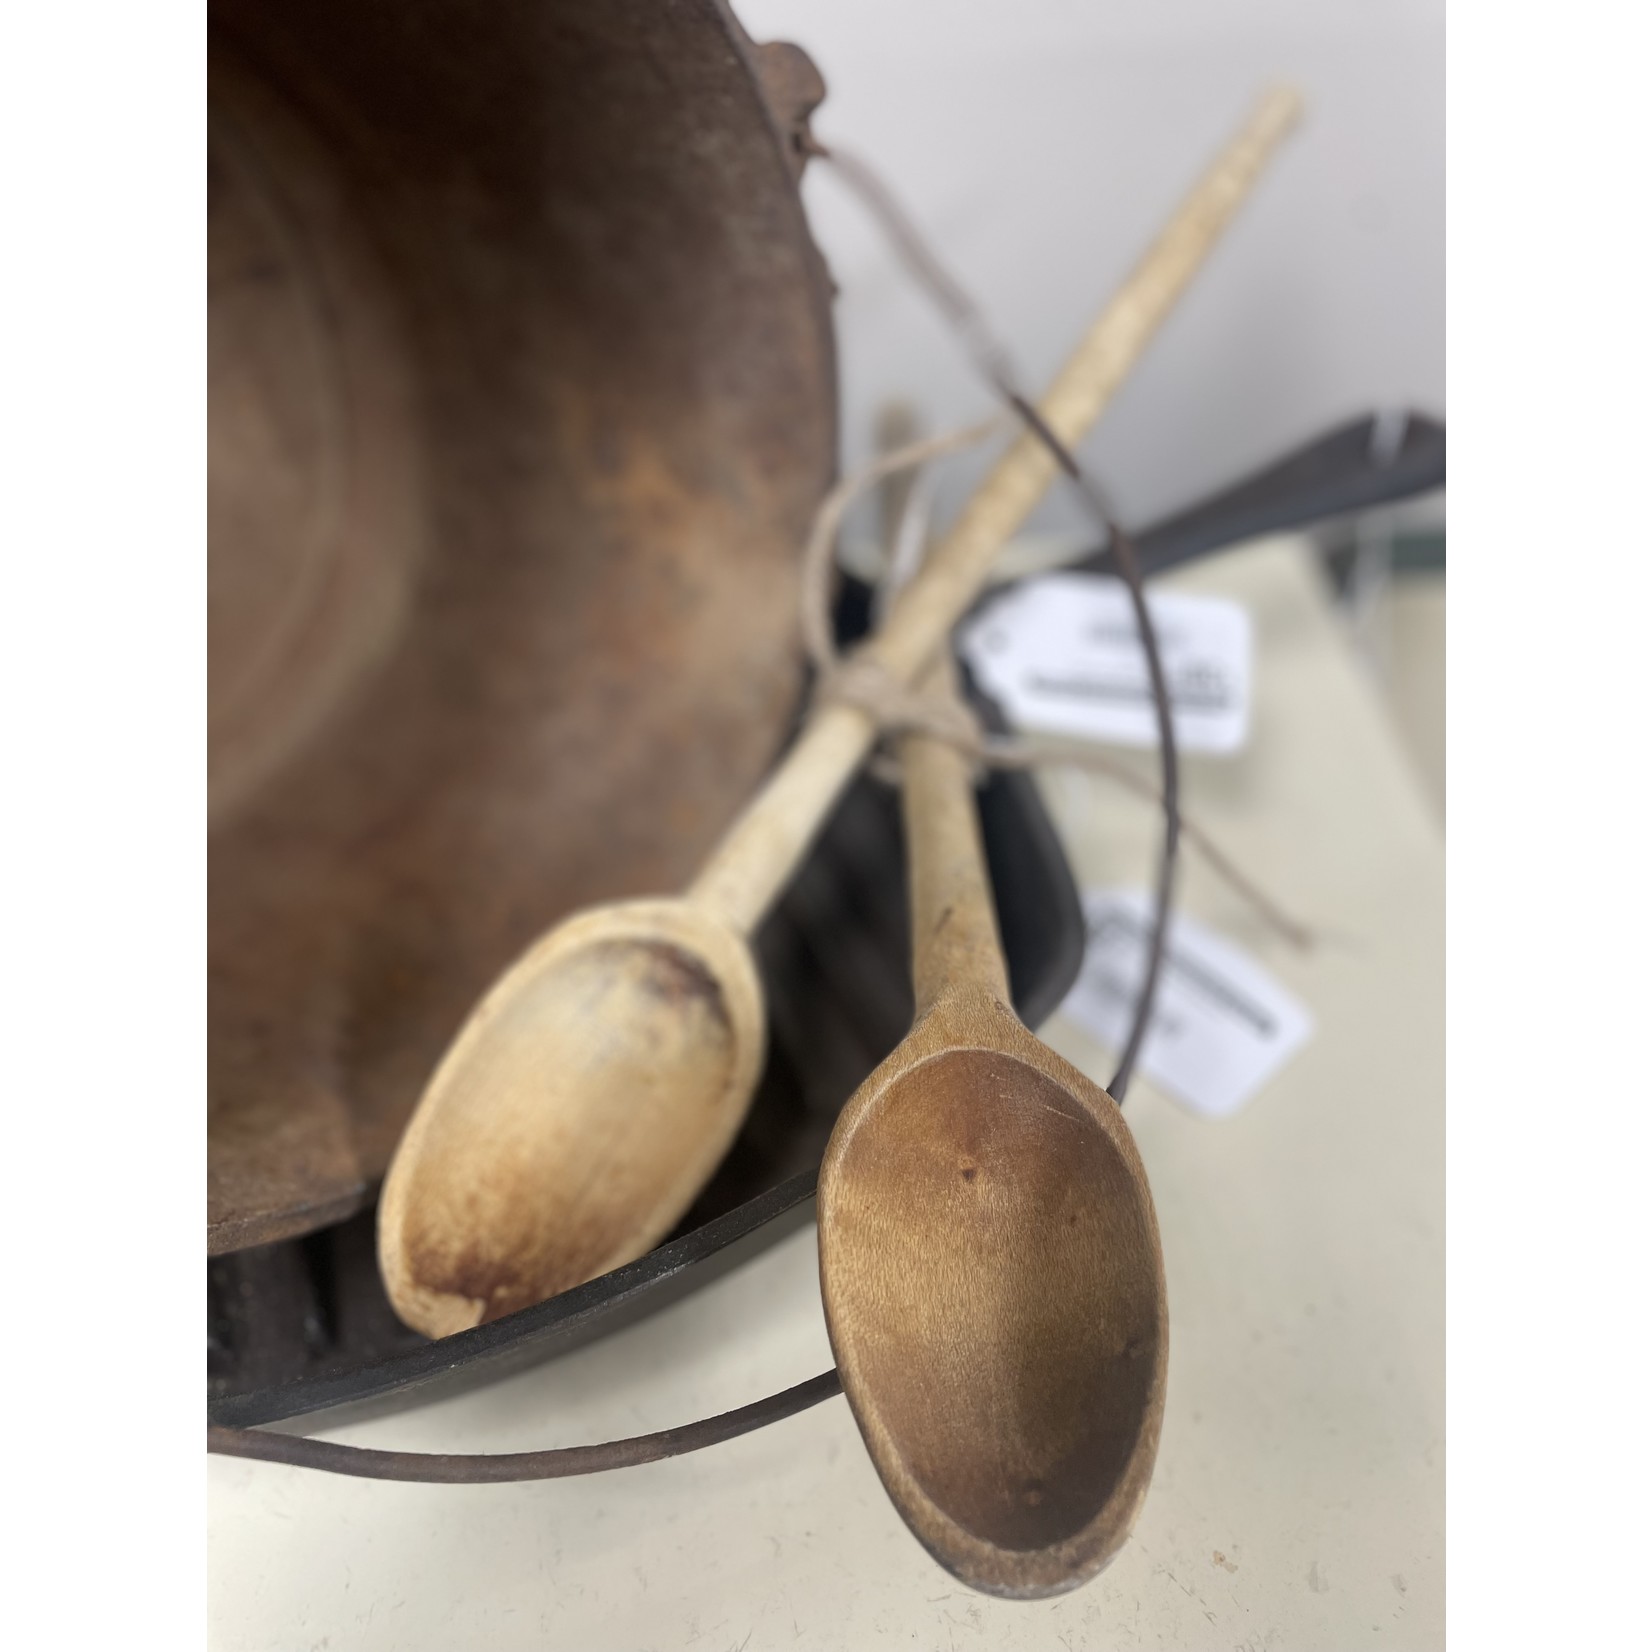 W.A.S Pair of Wood Spoons